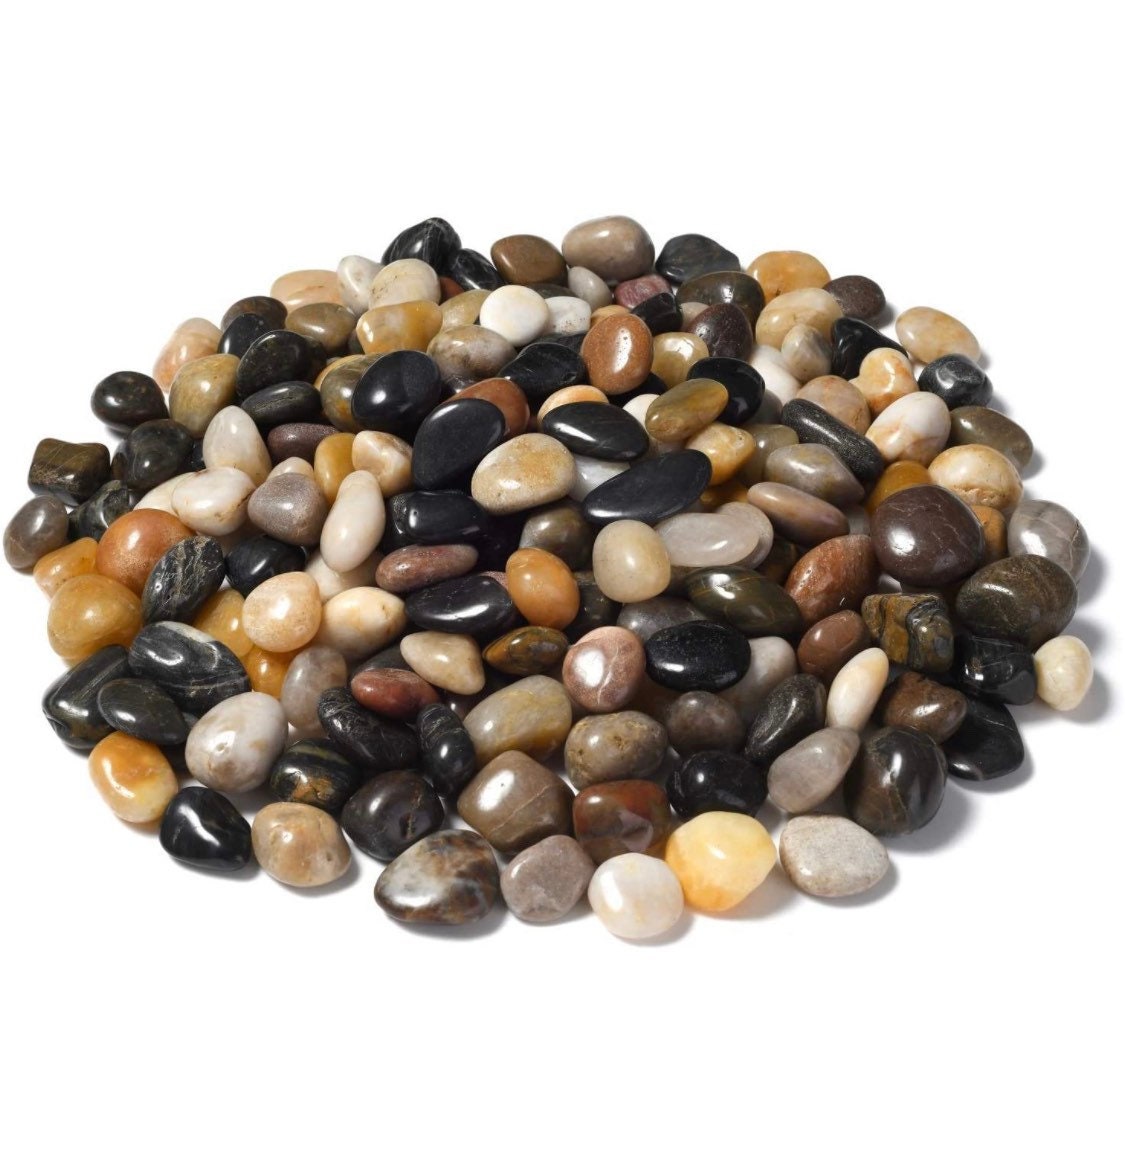 Pebbles - Garden Stones - 1lb smooth polished River stones for crafts, plants, and tanks!